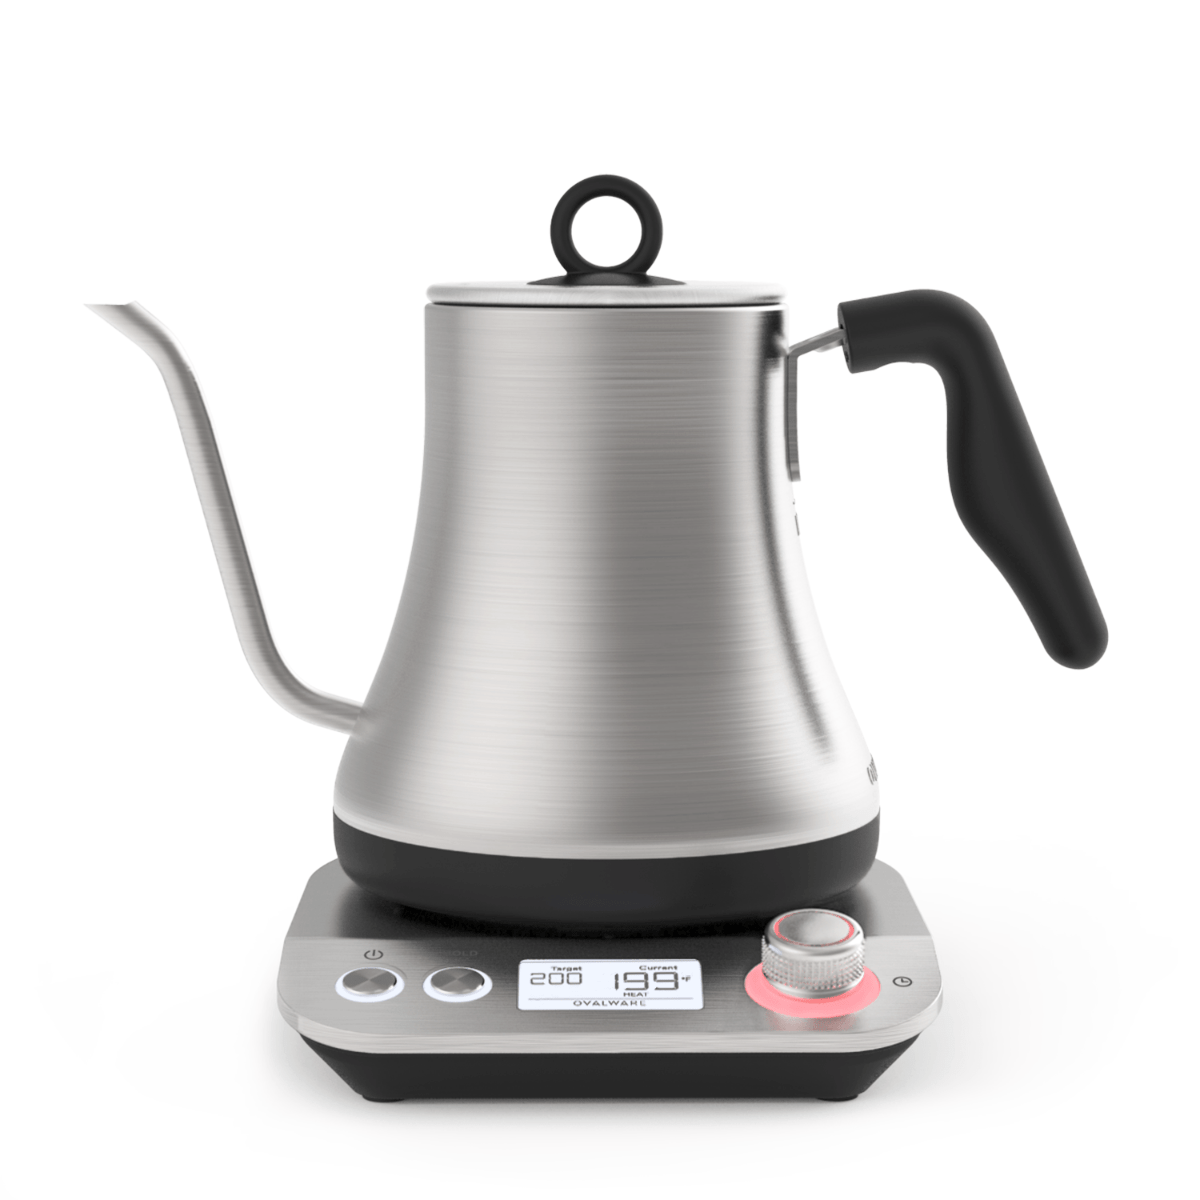 A Magic Hour Electric Pour Over Kettle with a matte silver finish sits on a digital base. The base features a display screen showing "200°F" and "193°F" with buttons and a red dial for temperature adjustments, perfect for brewing Magic Hour Tea. The kettle has a black handle and a looped lid handle.